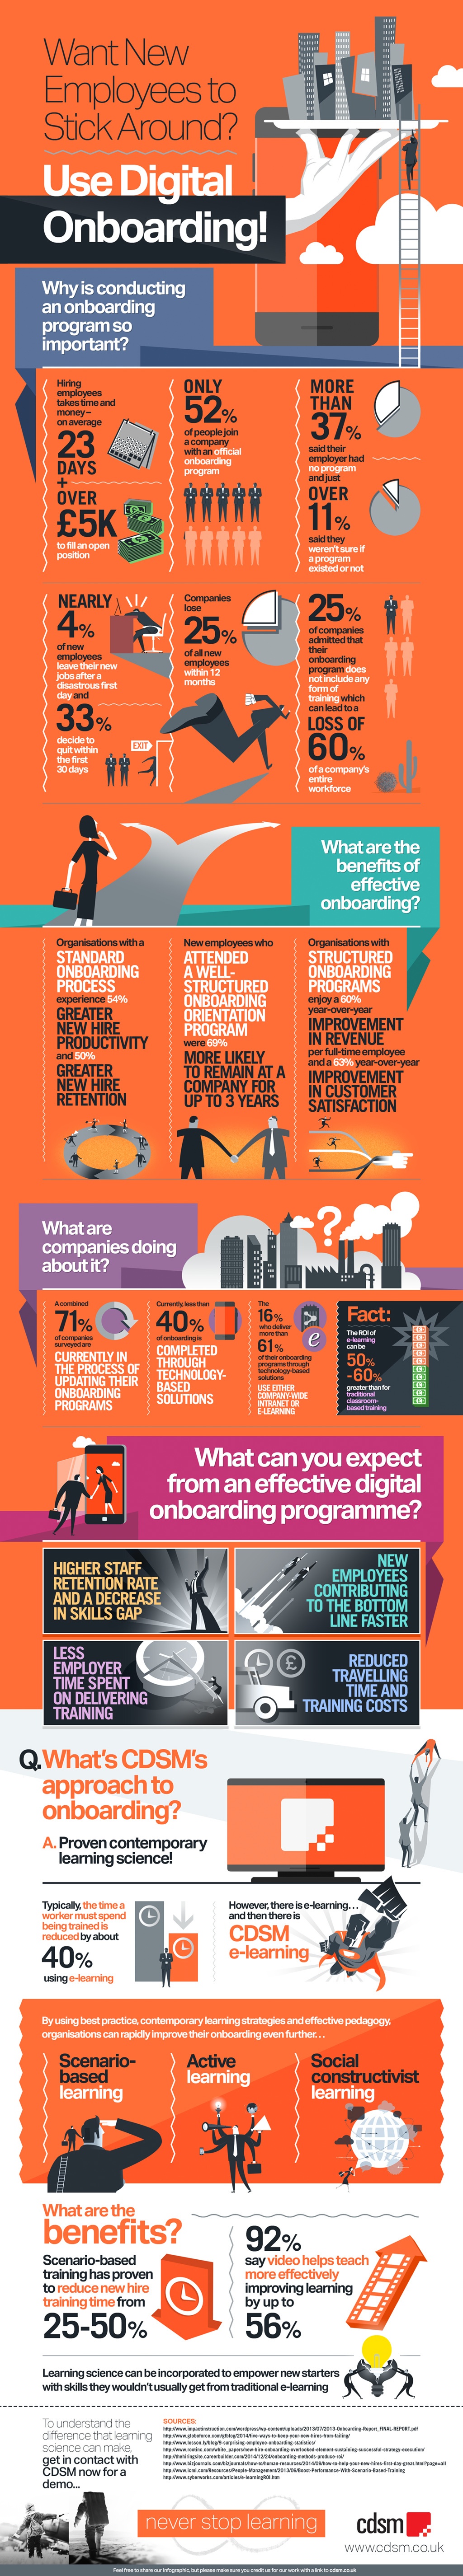 Use Digital Onboarding to Make New Employees Stick Around Infographic